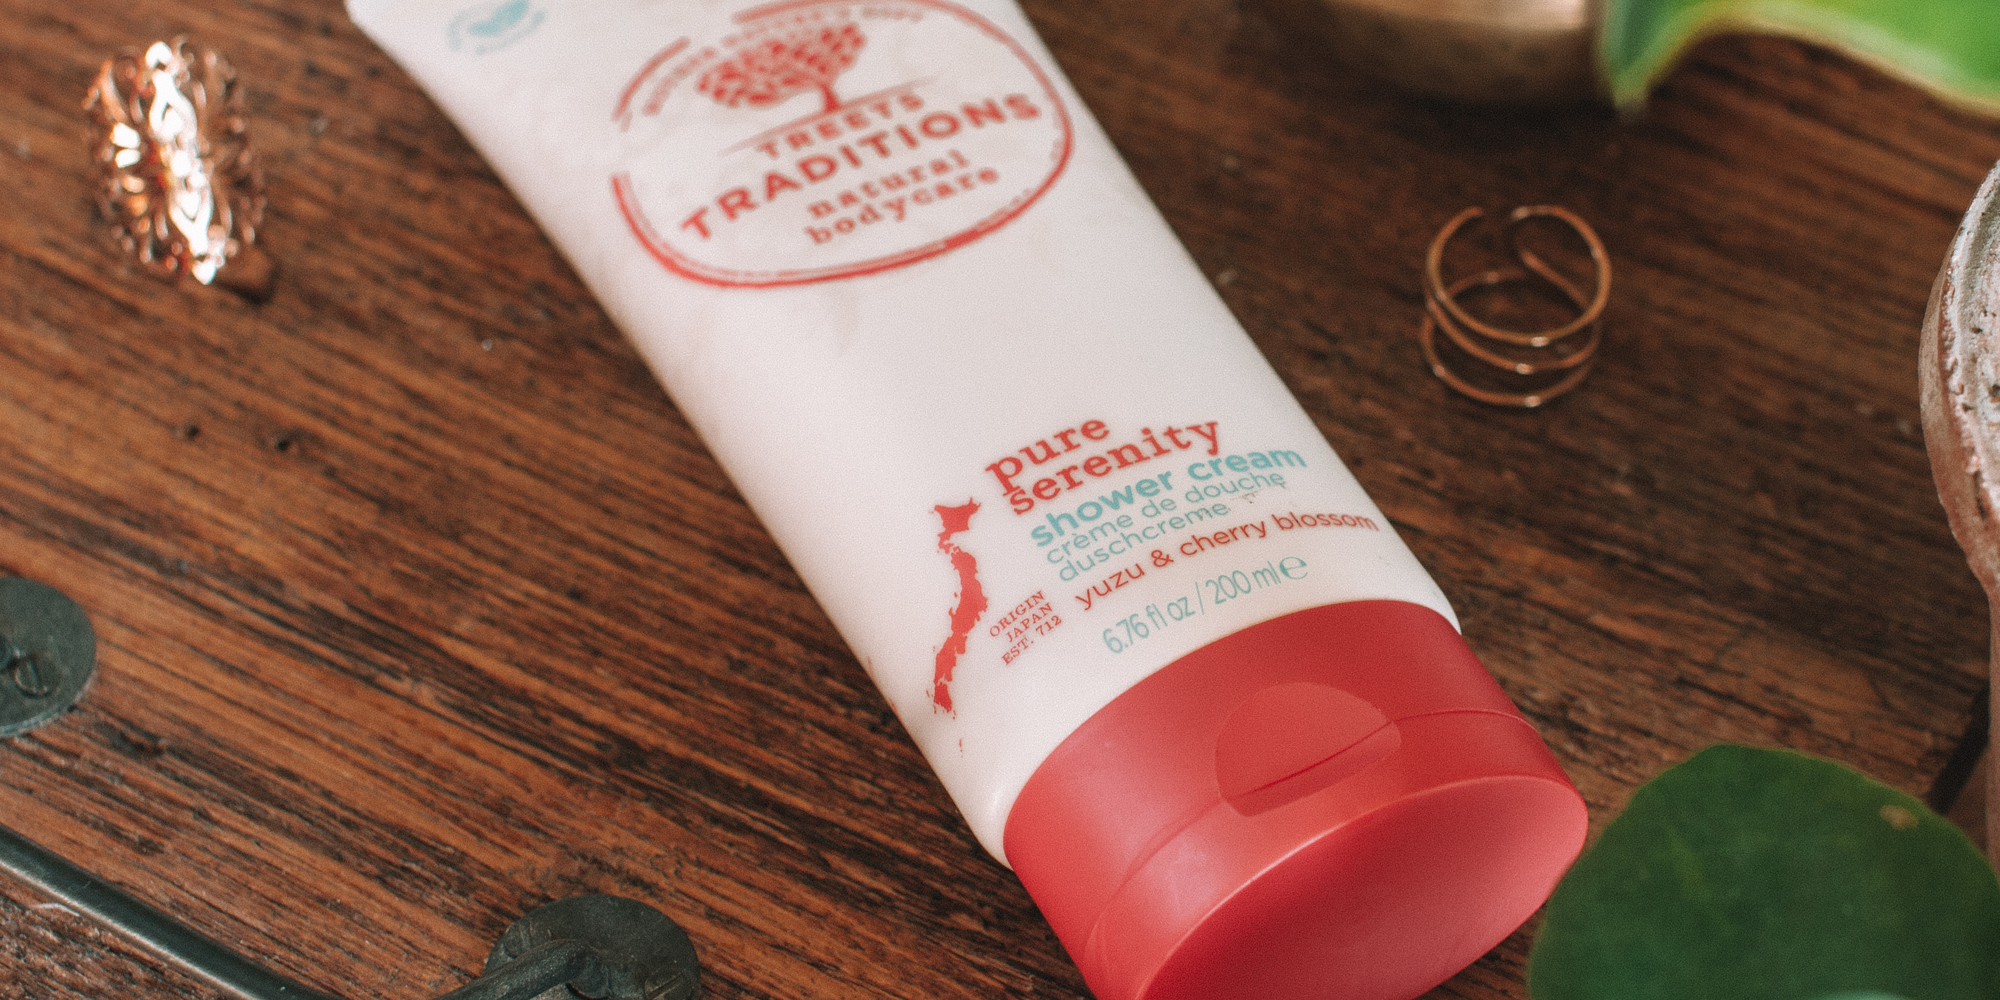 Treets Traditions Pure serenity shower cream